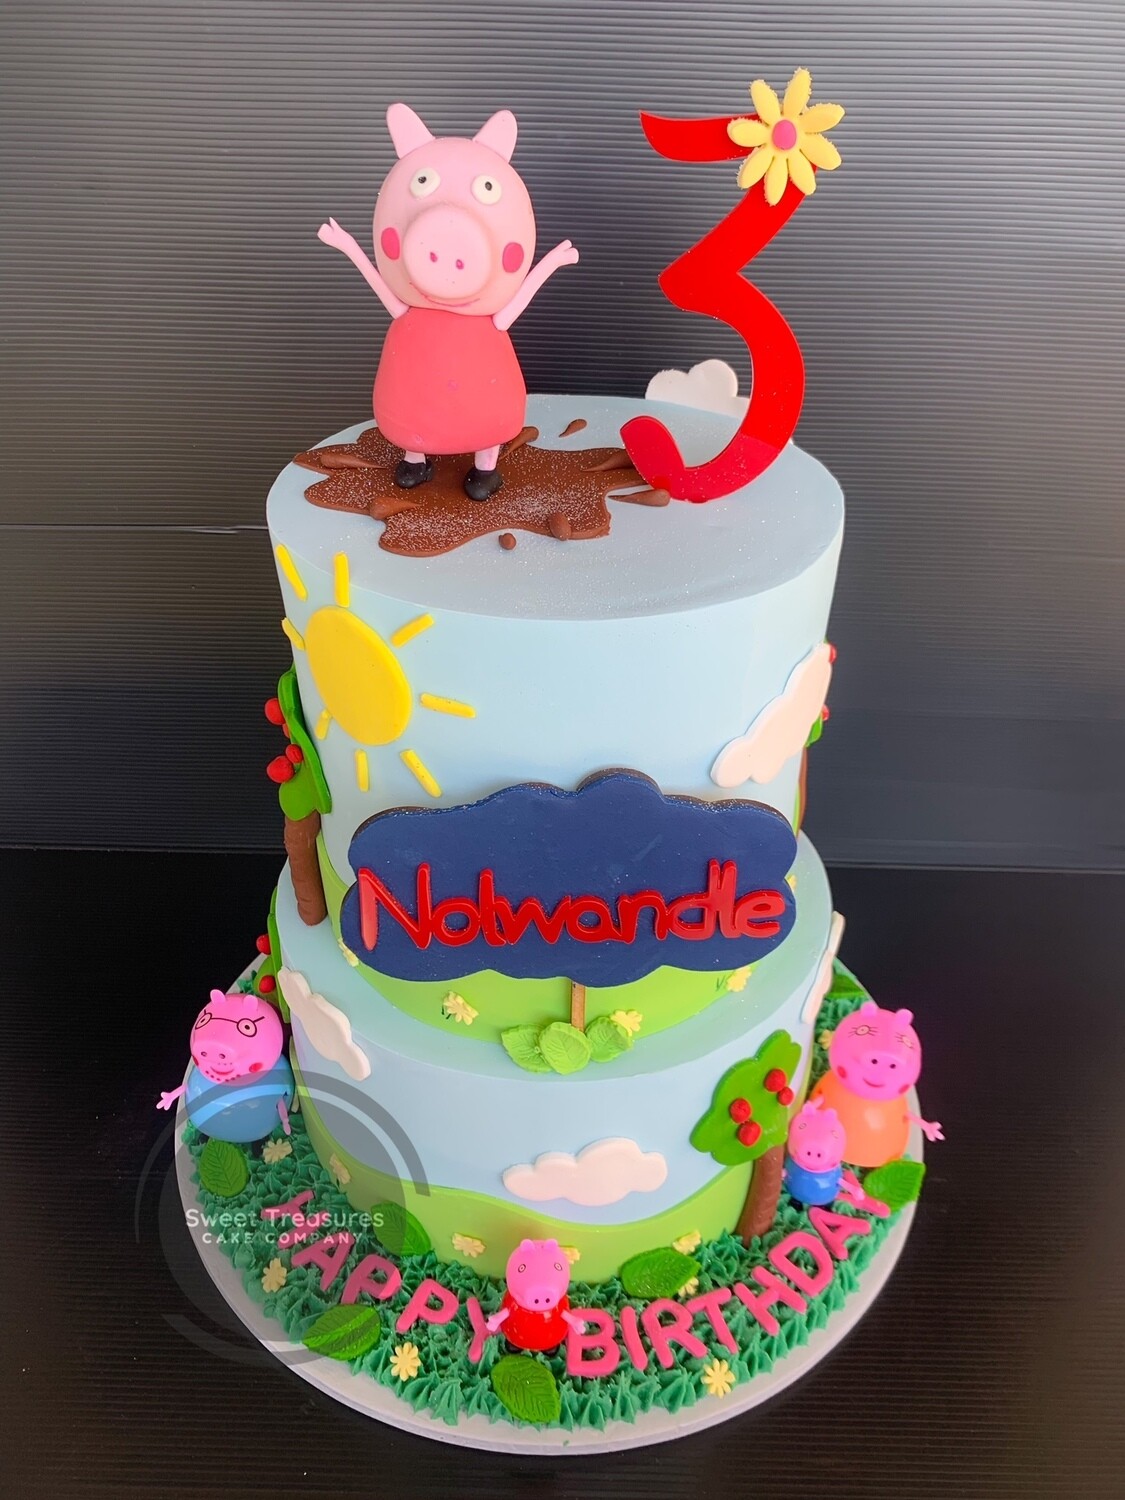 Peppa Pig birthday 2 tier Cake, Size: 5&amp;7 inches (12&amp;18cm wide per tier) 3 layers cake, 2 layers of filling per tier: up to 15 Servings, Upsize (Add Layer to make taller and serve more guests);: No thank you